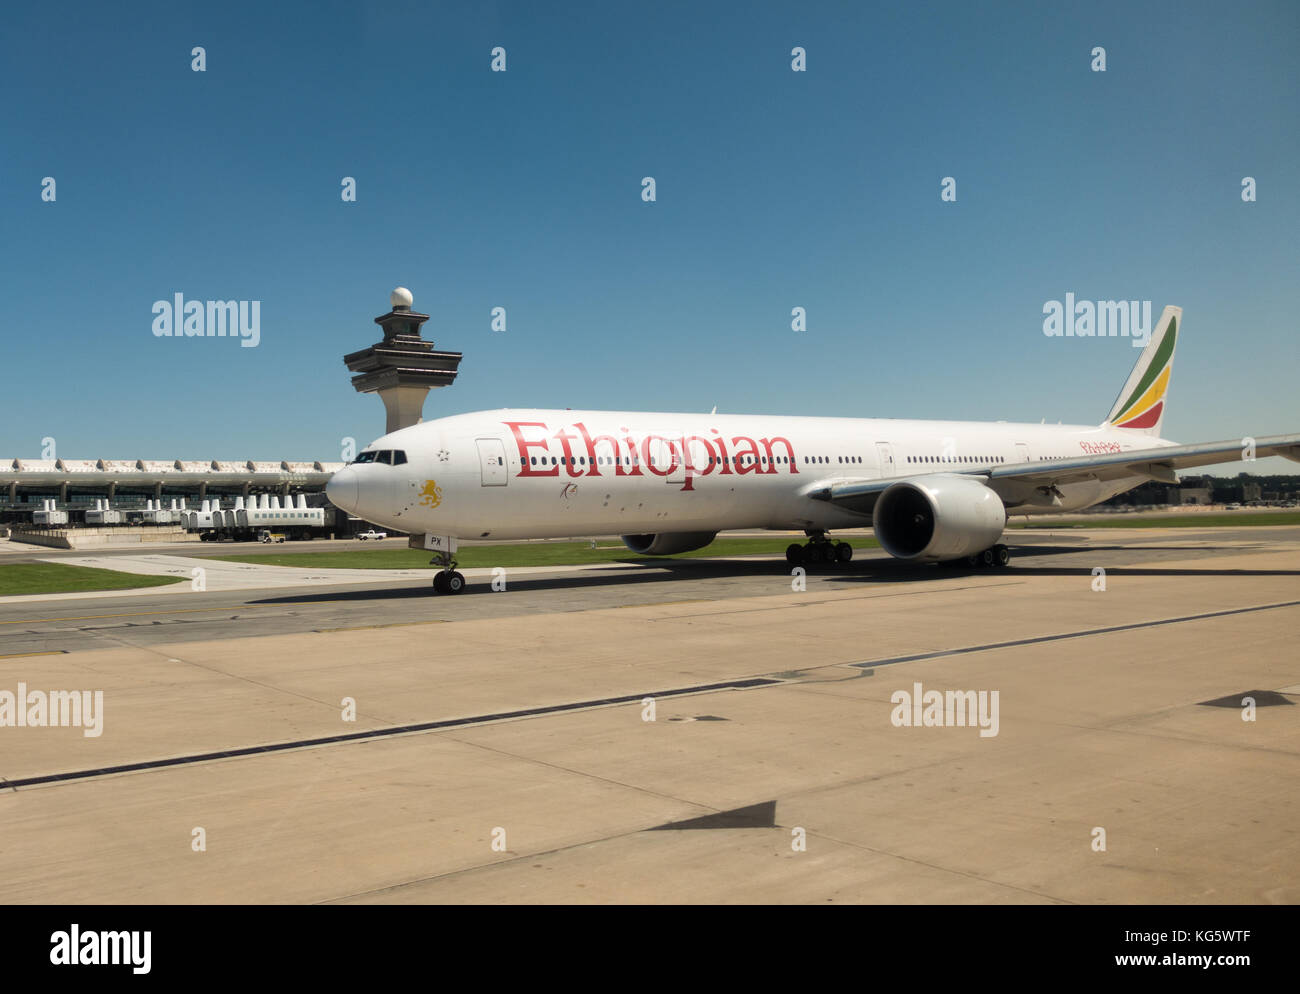 An Ethiopian Airlines Boeing 777-300ER (possibly ET-APX) plane taxiing at Washington Dulles International Airport (IAD), Dulles, VA, United States. Stock Photo